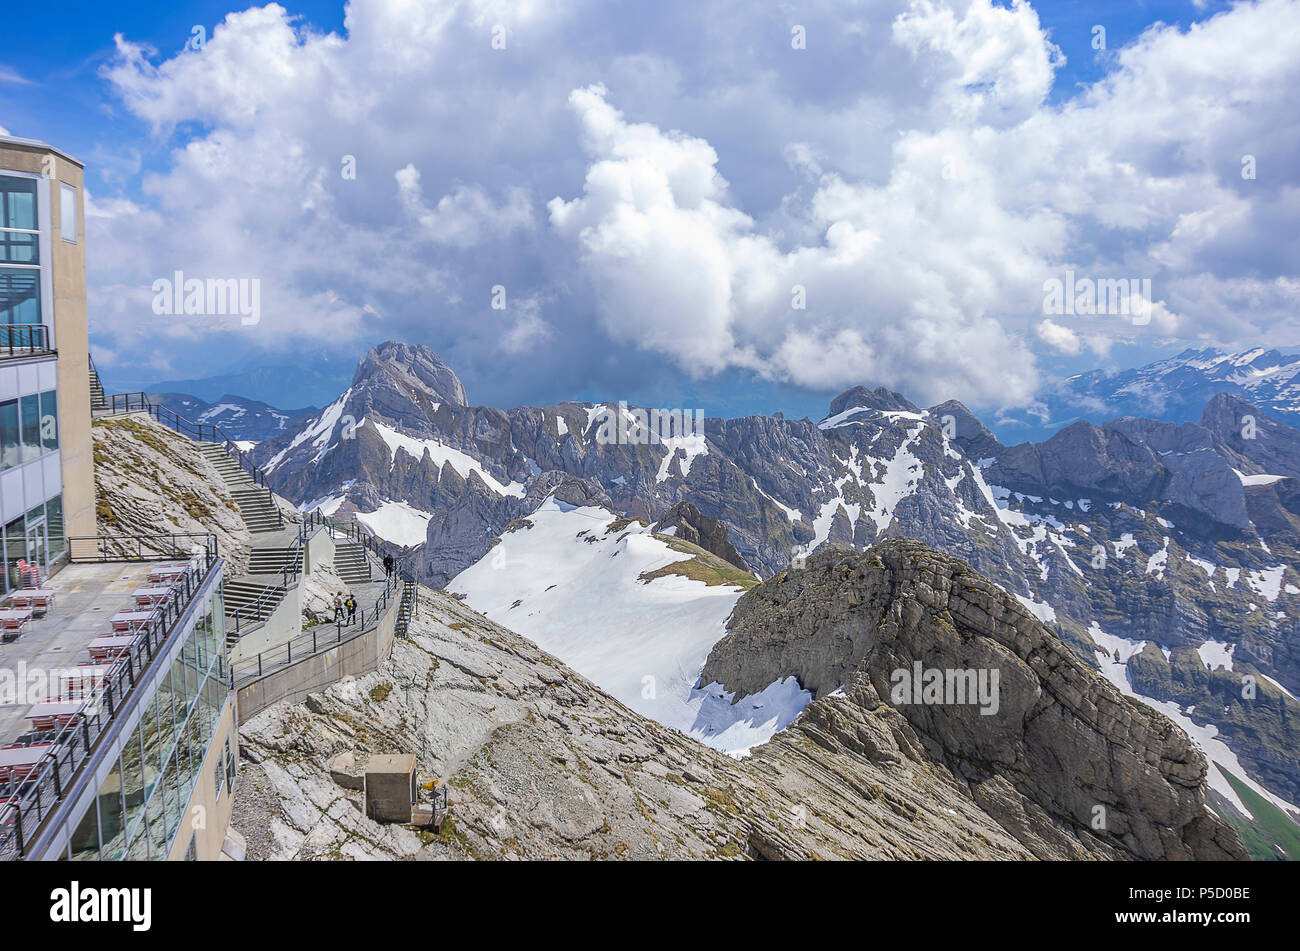 On the peak of Säntis Mountain, Appenzell Alps, Switzerland - view from the observation deck on the summit over the surrounding landscape. Stock Photo